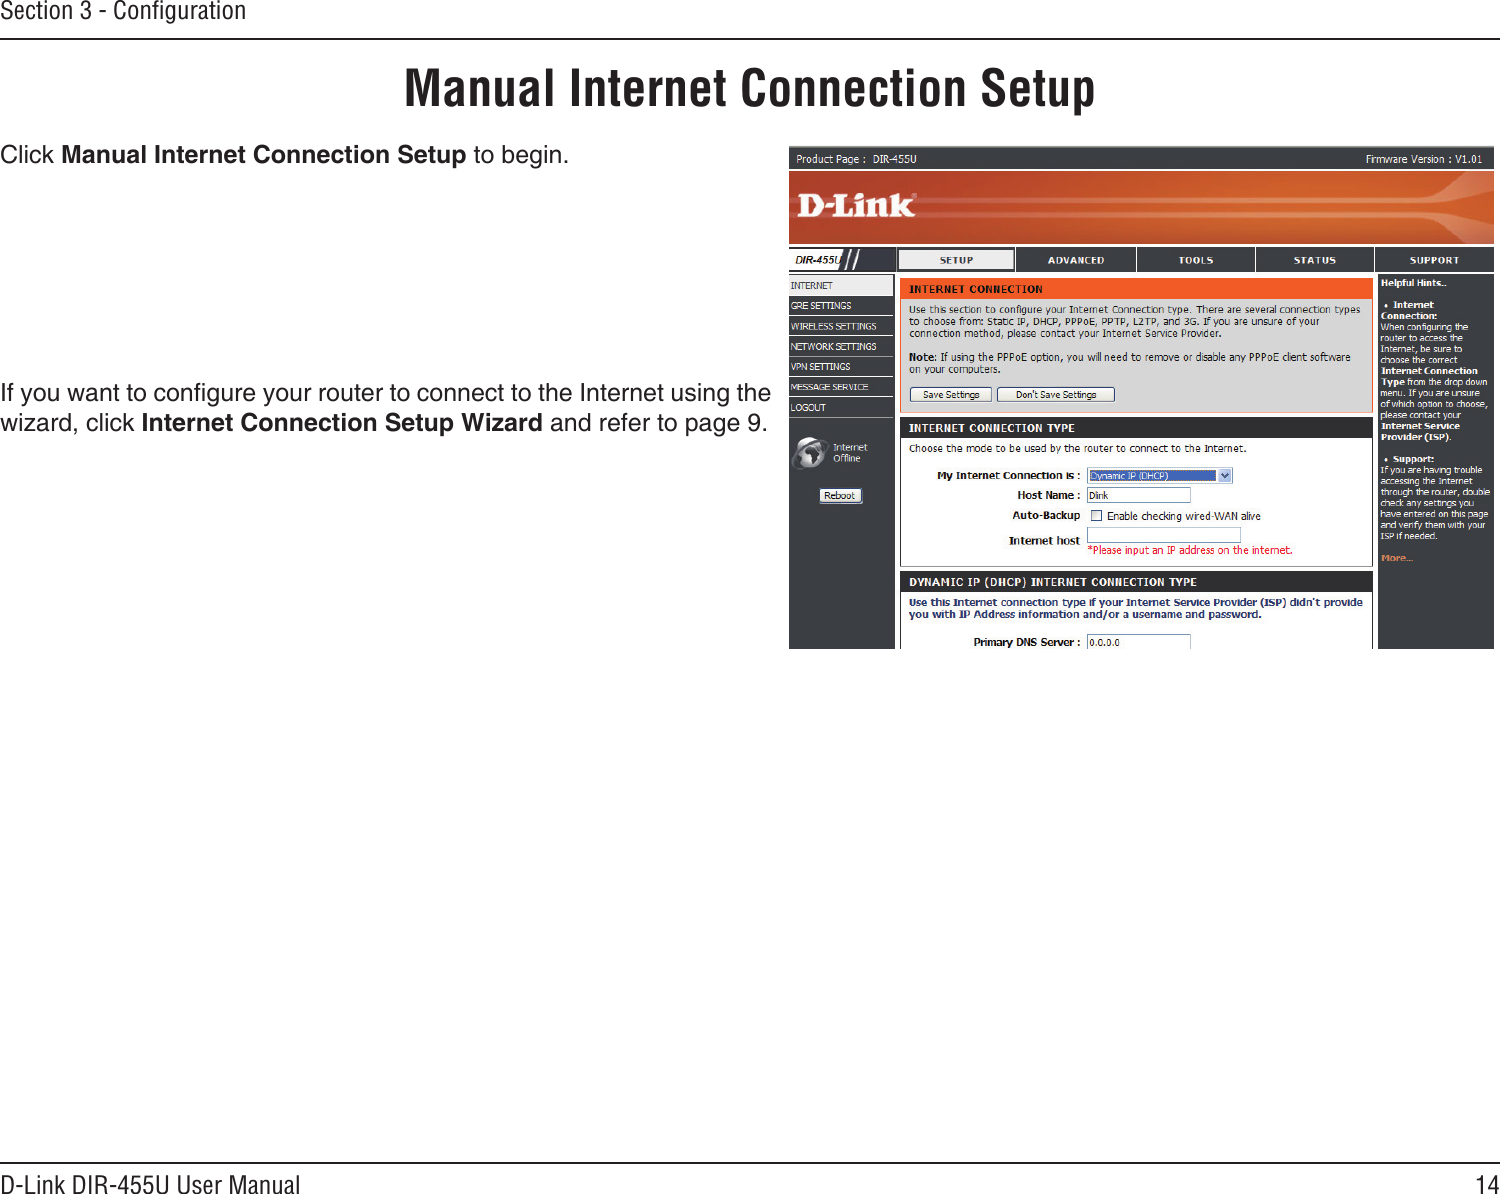 14D-Link DIR-455U User ManualSection 3 - ConﬁgurationManual Internet Connection SetupClick Manual Internet Connection Setup to begin.If you want to congure your router to connect to the Internet using the wizard, click Internet Connection Setup Wizard and refer to page 9.